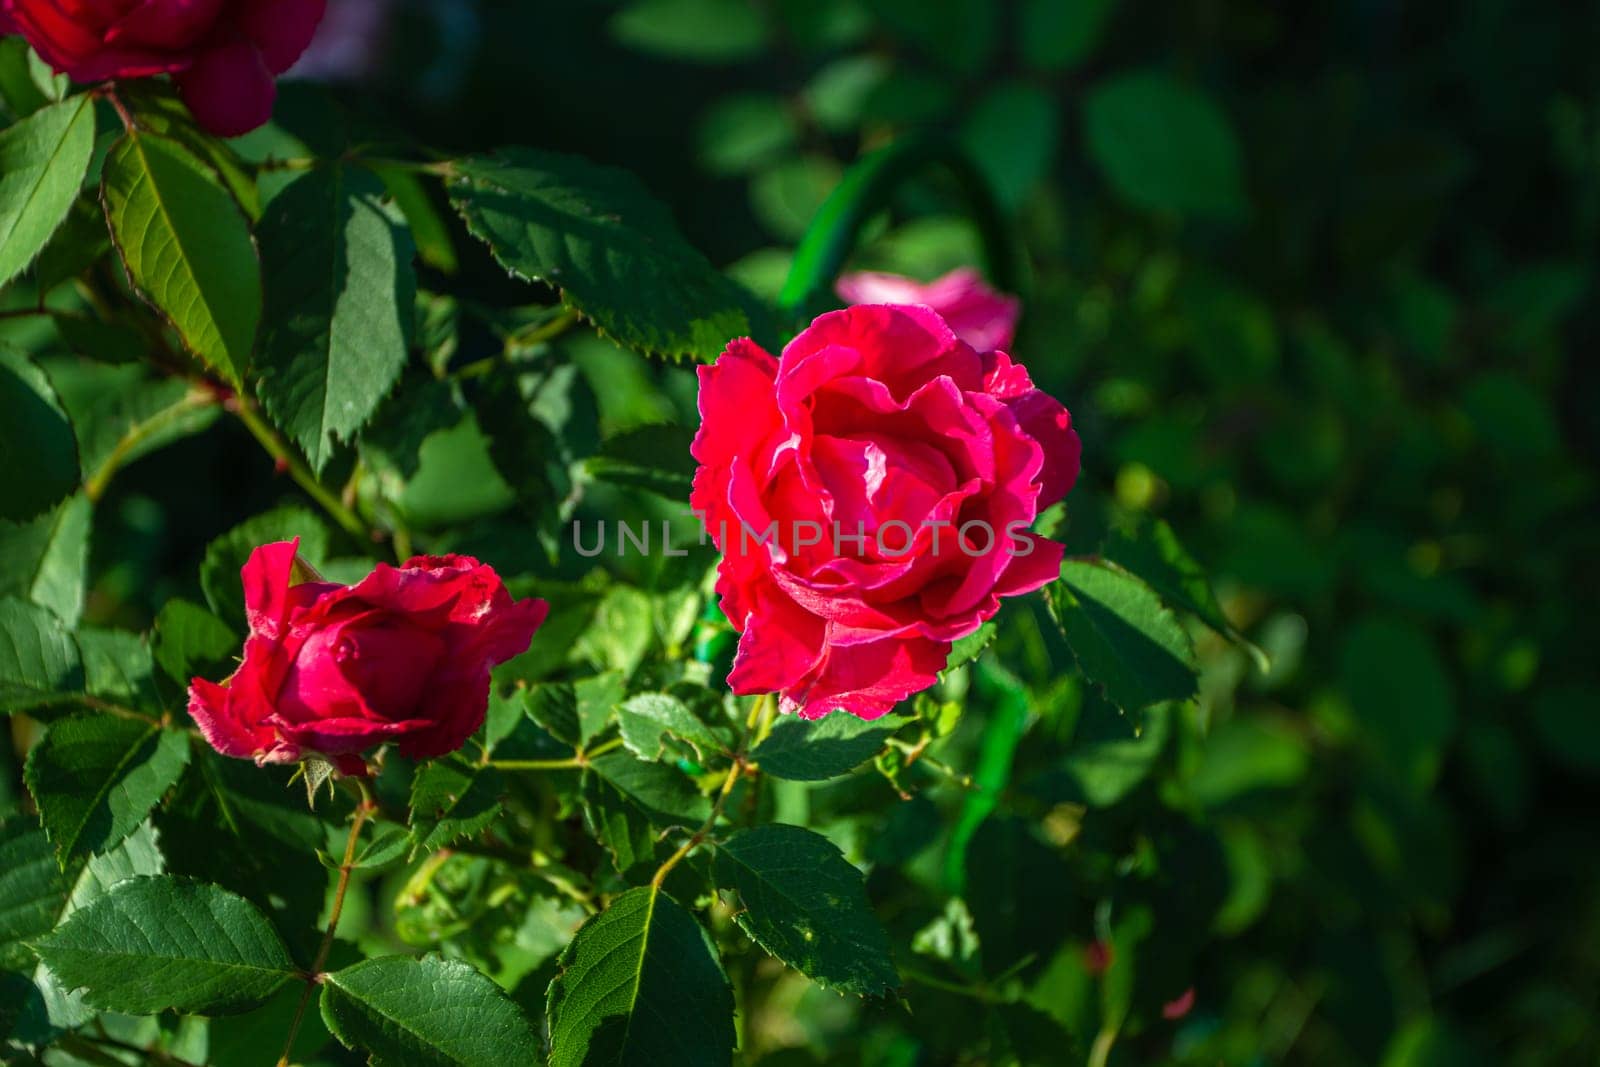 Pink rose flower close-up on a background of green leaves. Decorative shrubs. Garden decor.